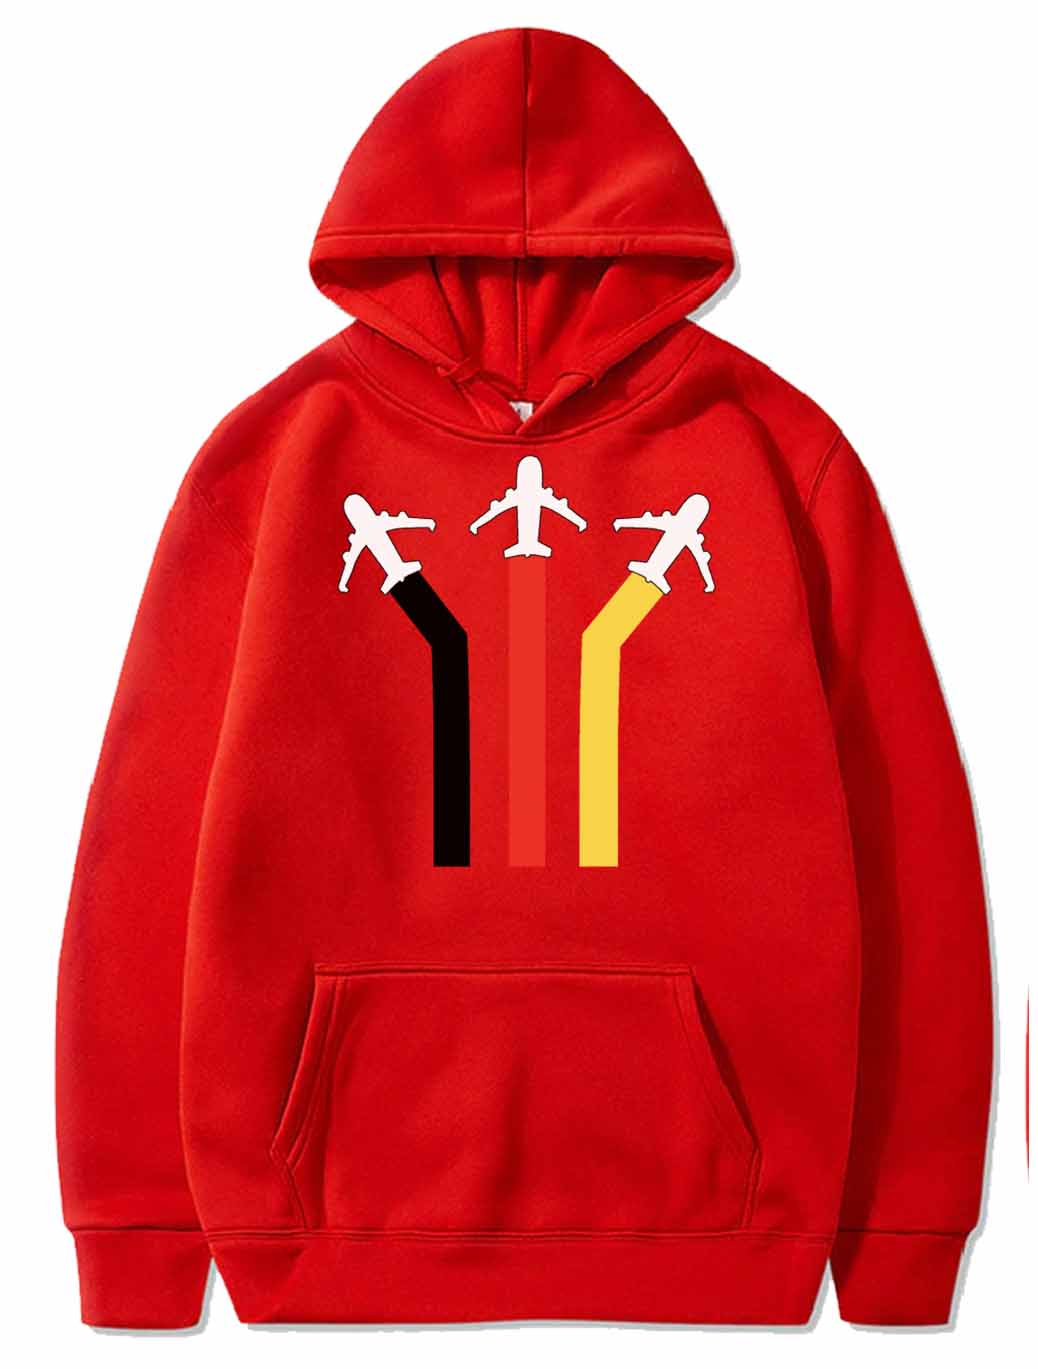 Pilot airplane airplanes gift PULLOVER THE AV8R